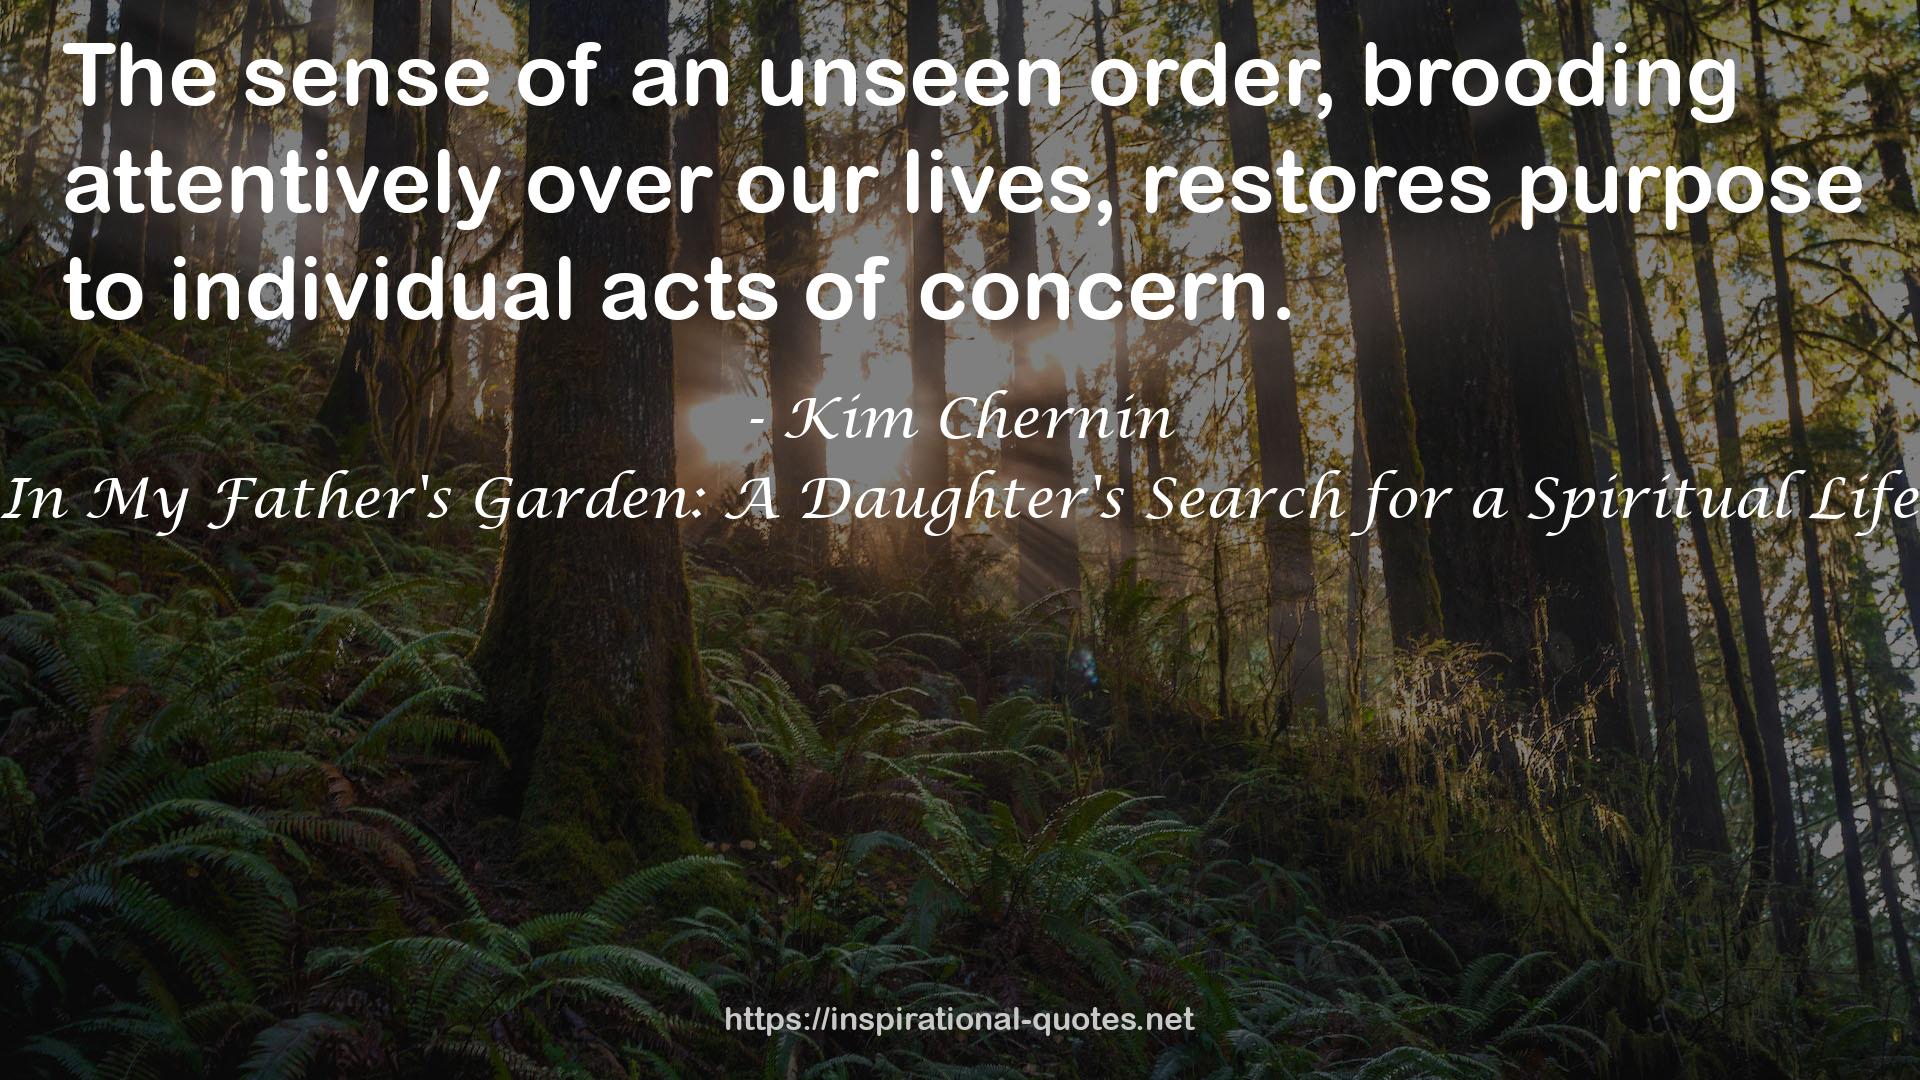 In My Father's Garden: A Daughter's Search for a Spiritual Life QUOTES